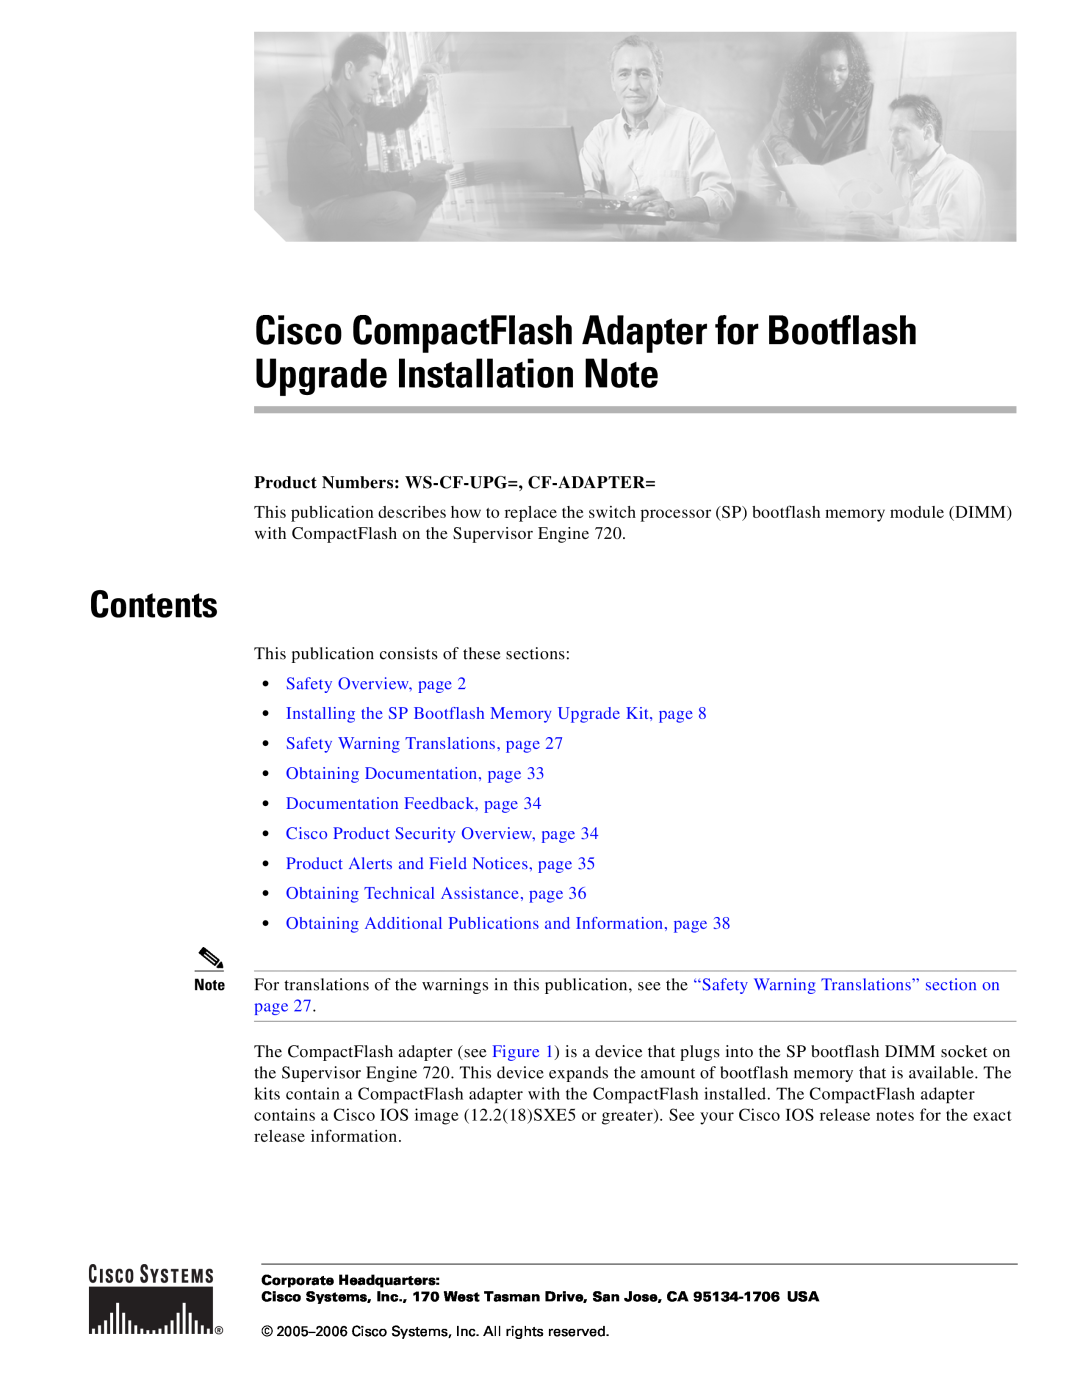 Cisco Systems CompactFlash Adapter manual Contents, Product Numbers WS-CF-UPG=, CF-ADAPTER=, Safety Overview, page 